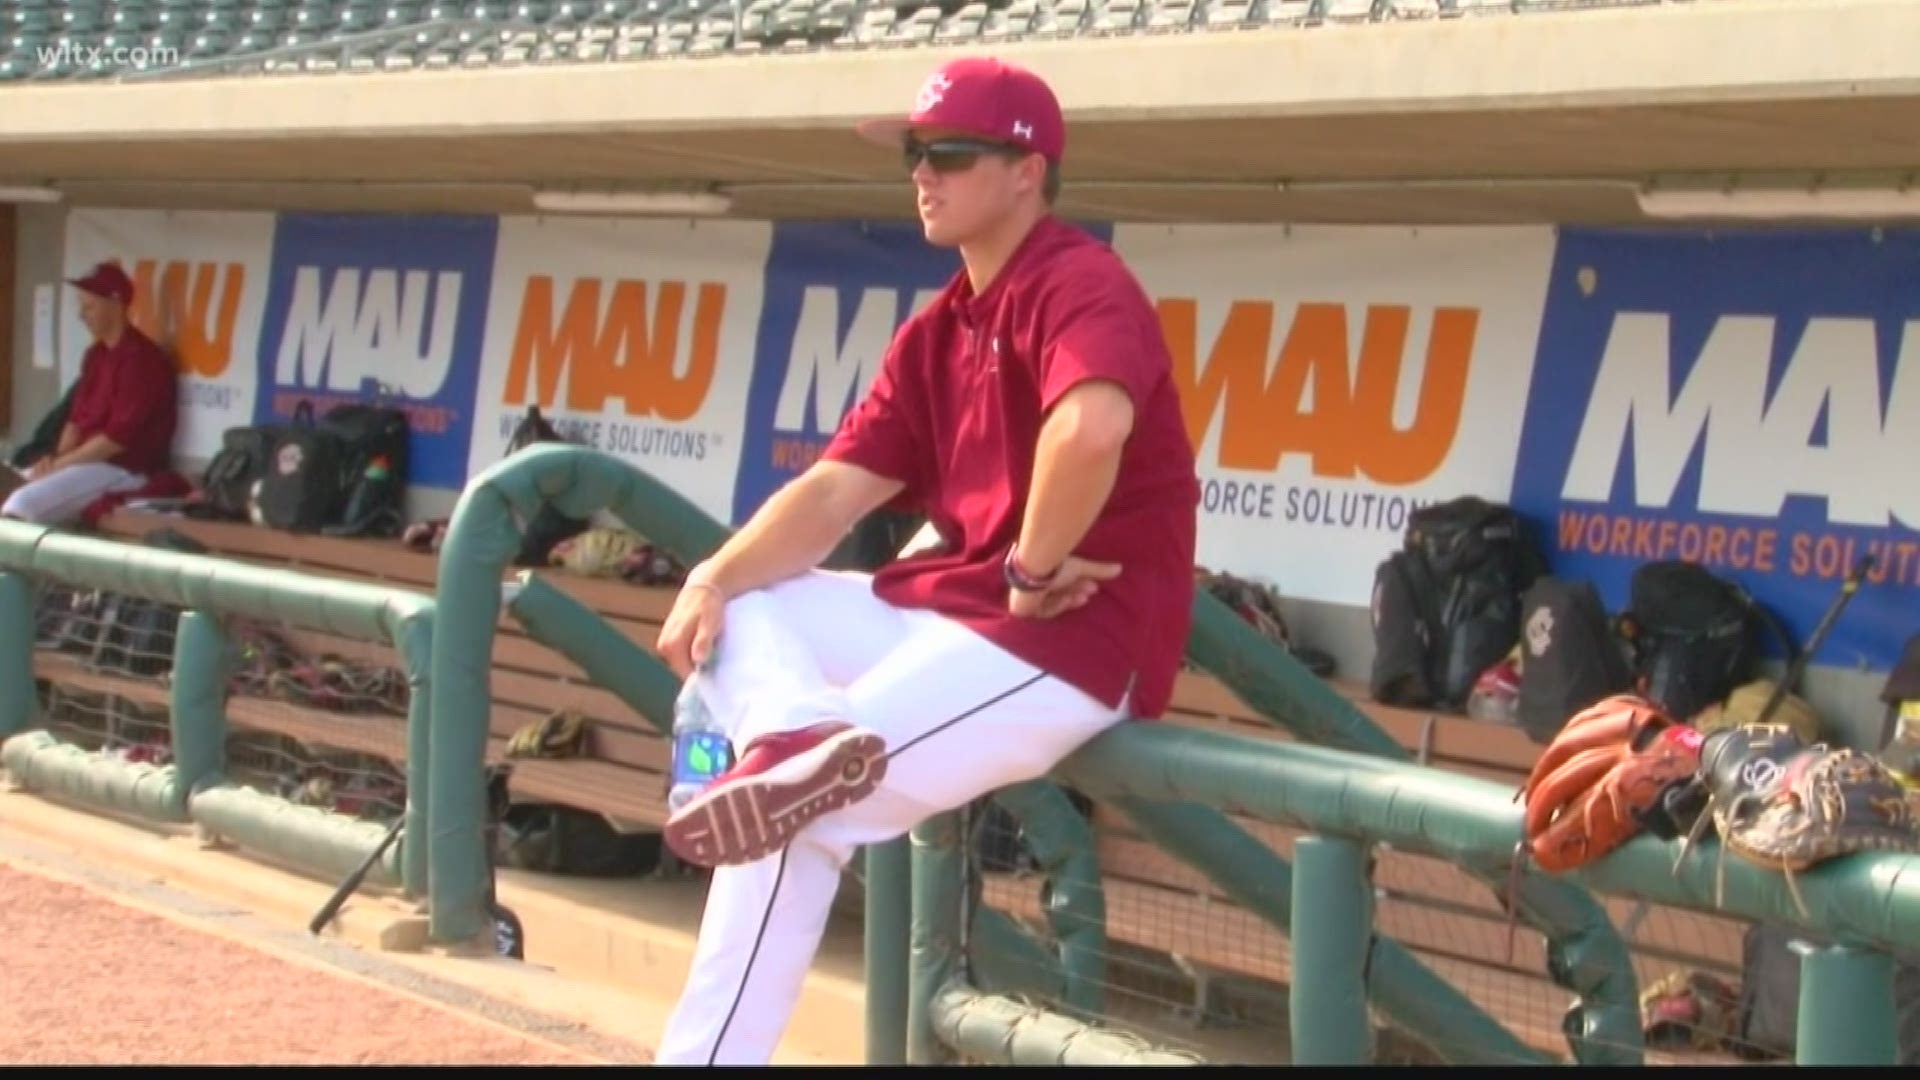 What do you do when you're dream of playing of pro baseball disappears? For Justin Row he made the quick transition into coaching and it's helped him cope and realize there's a lot more baseball left in his future.